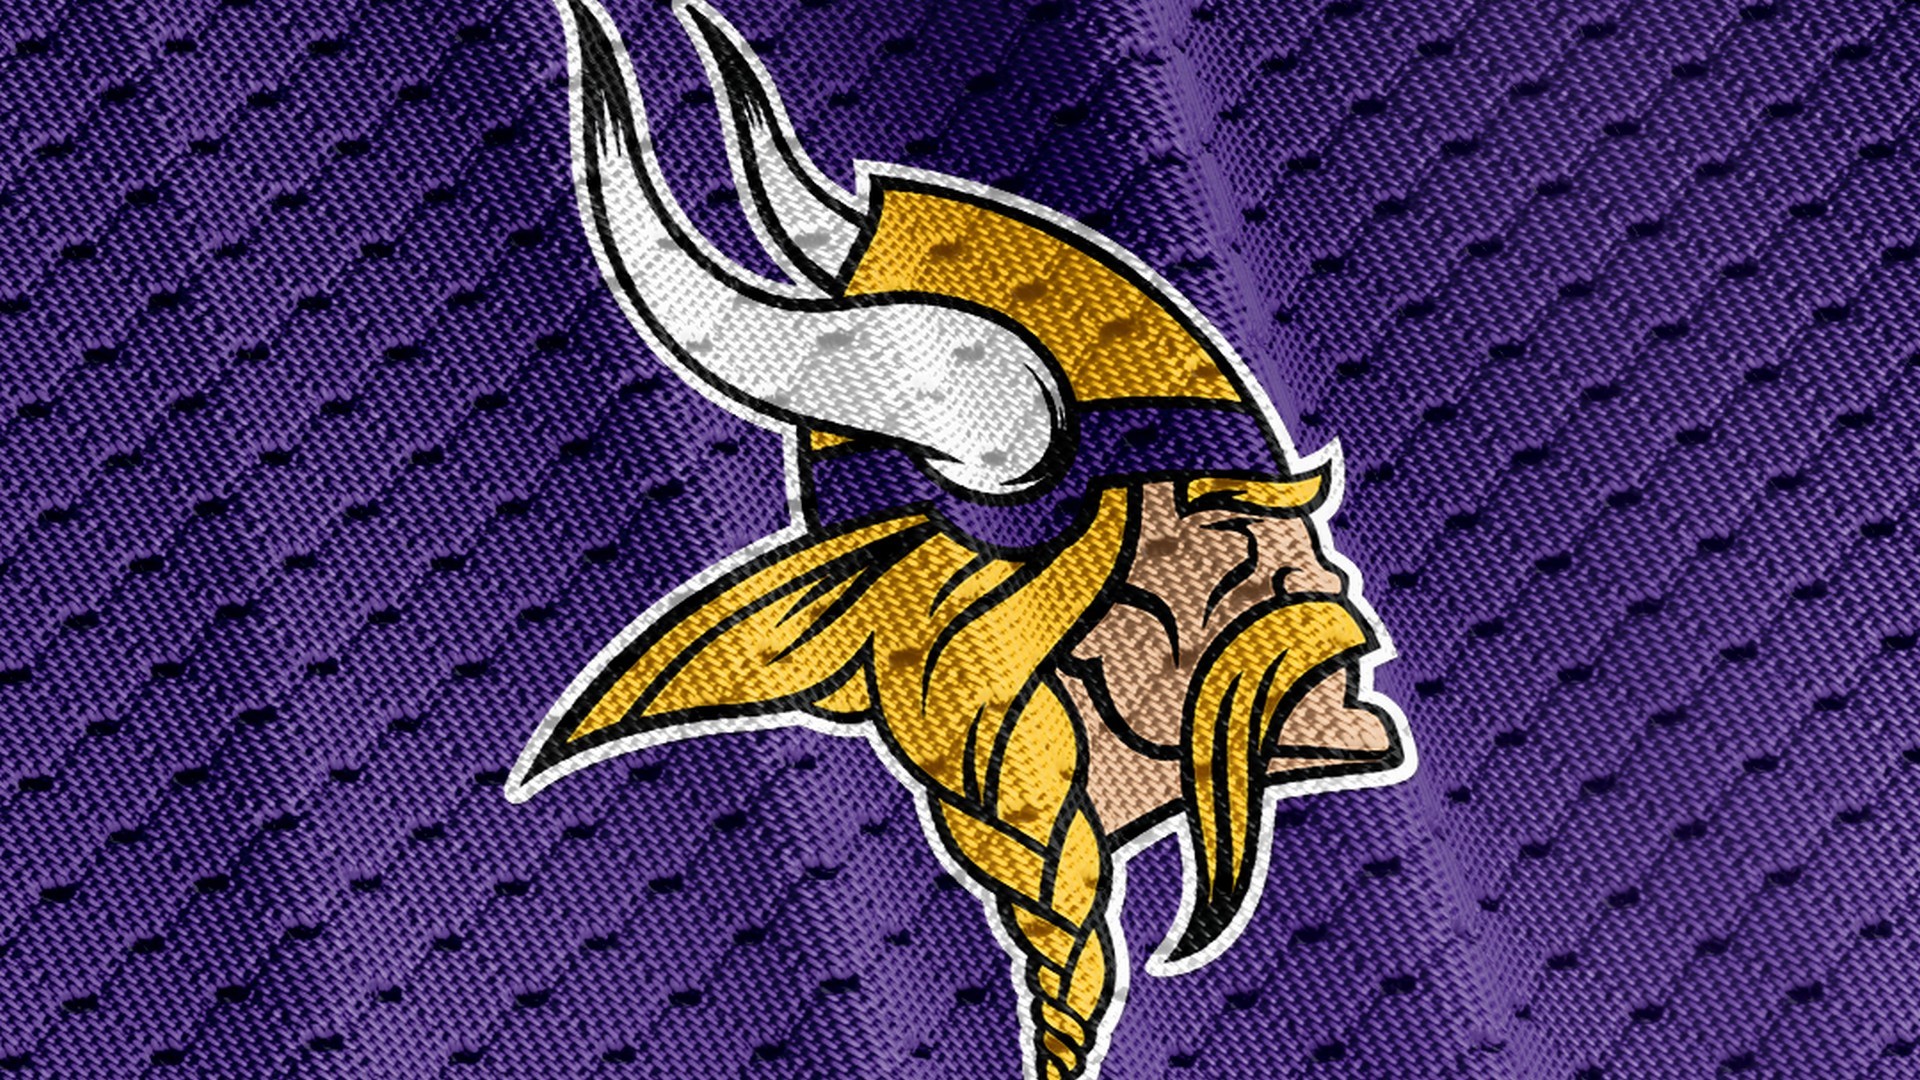 1920x1080 Minnesota Vikings For PC Wallpaper with resolution  pixel. You can  make this wallpaper for